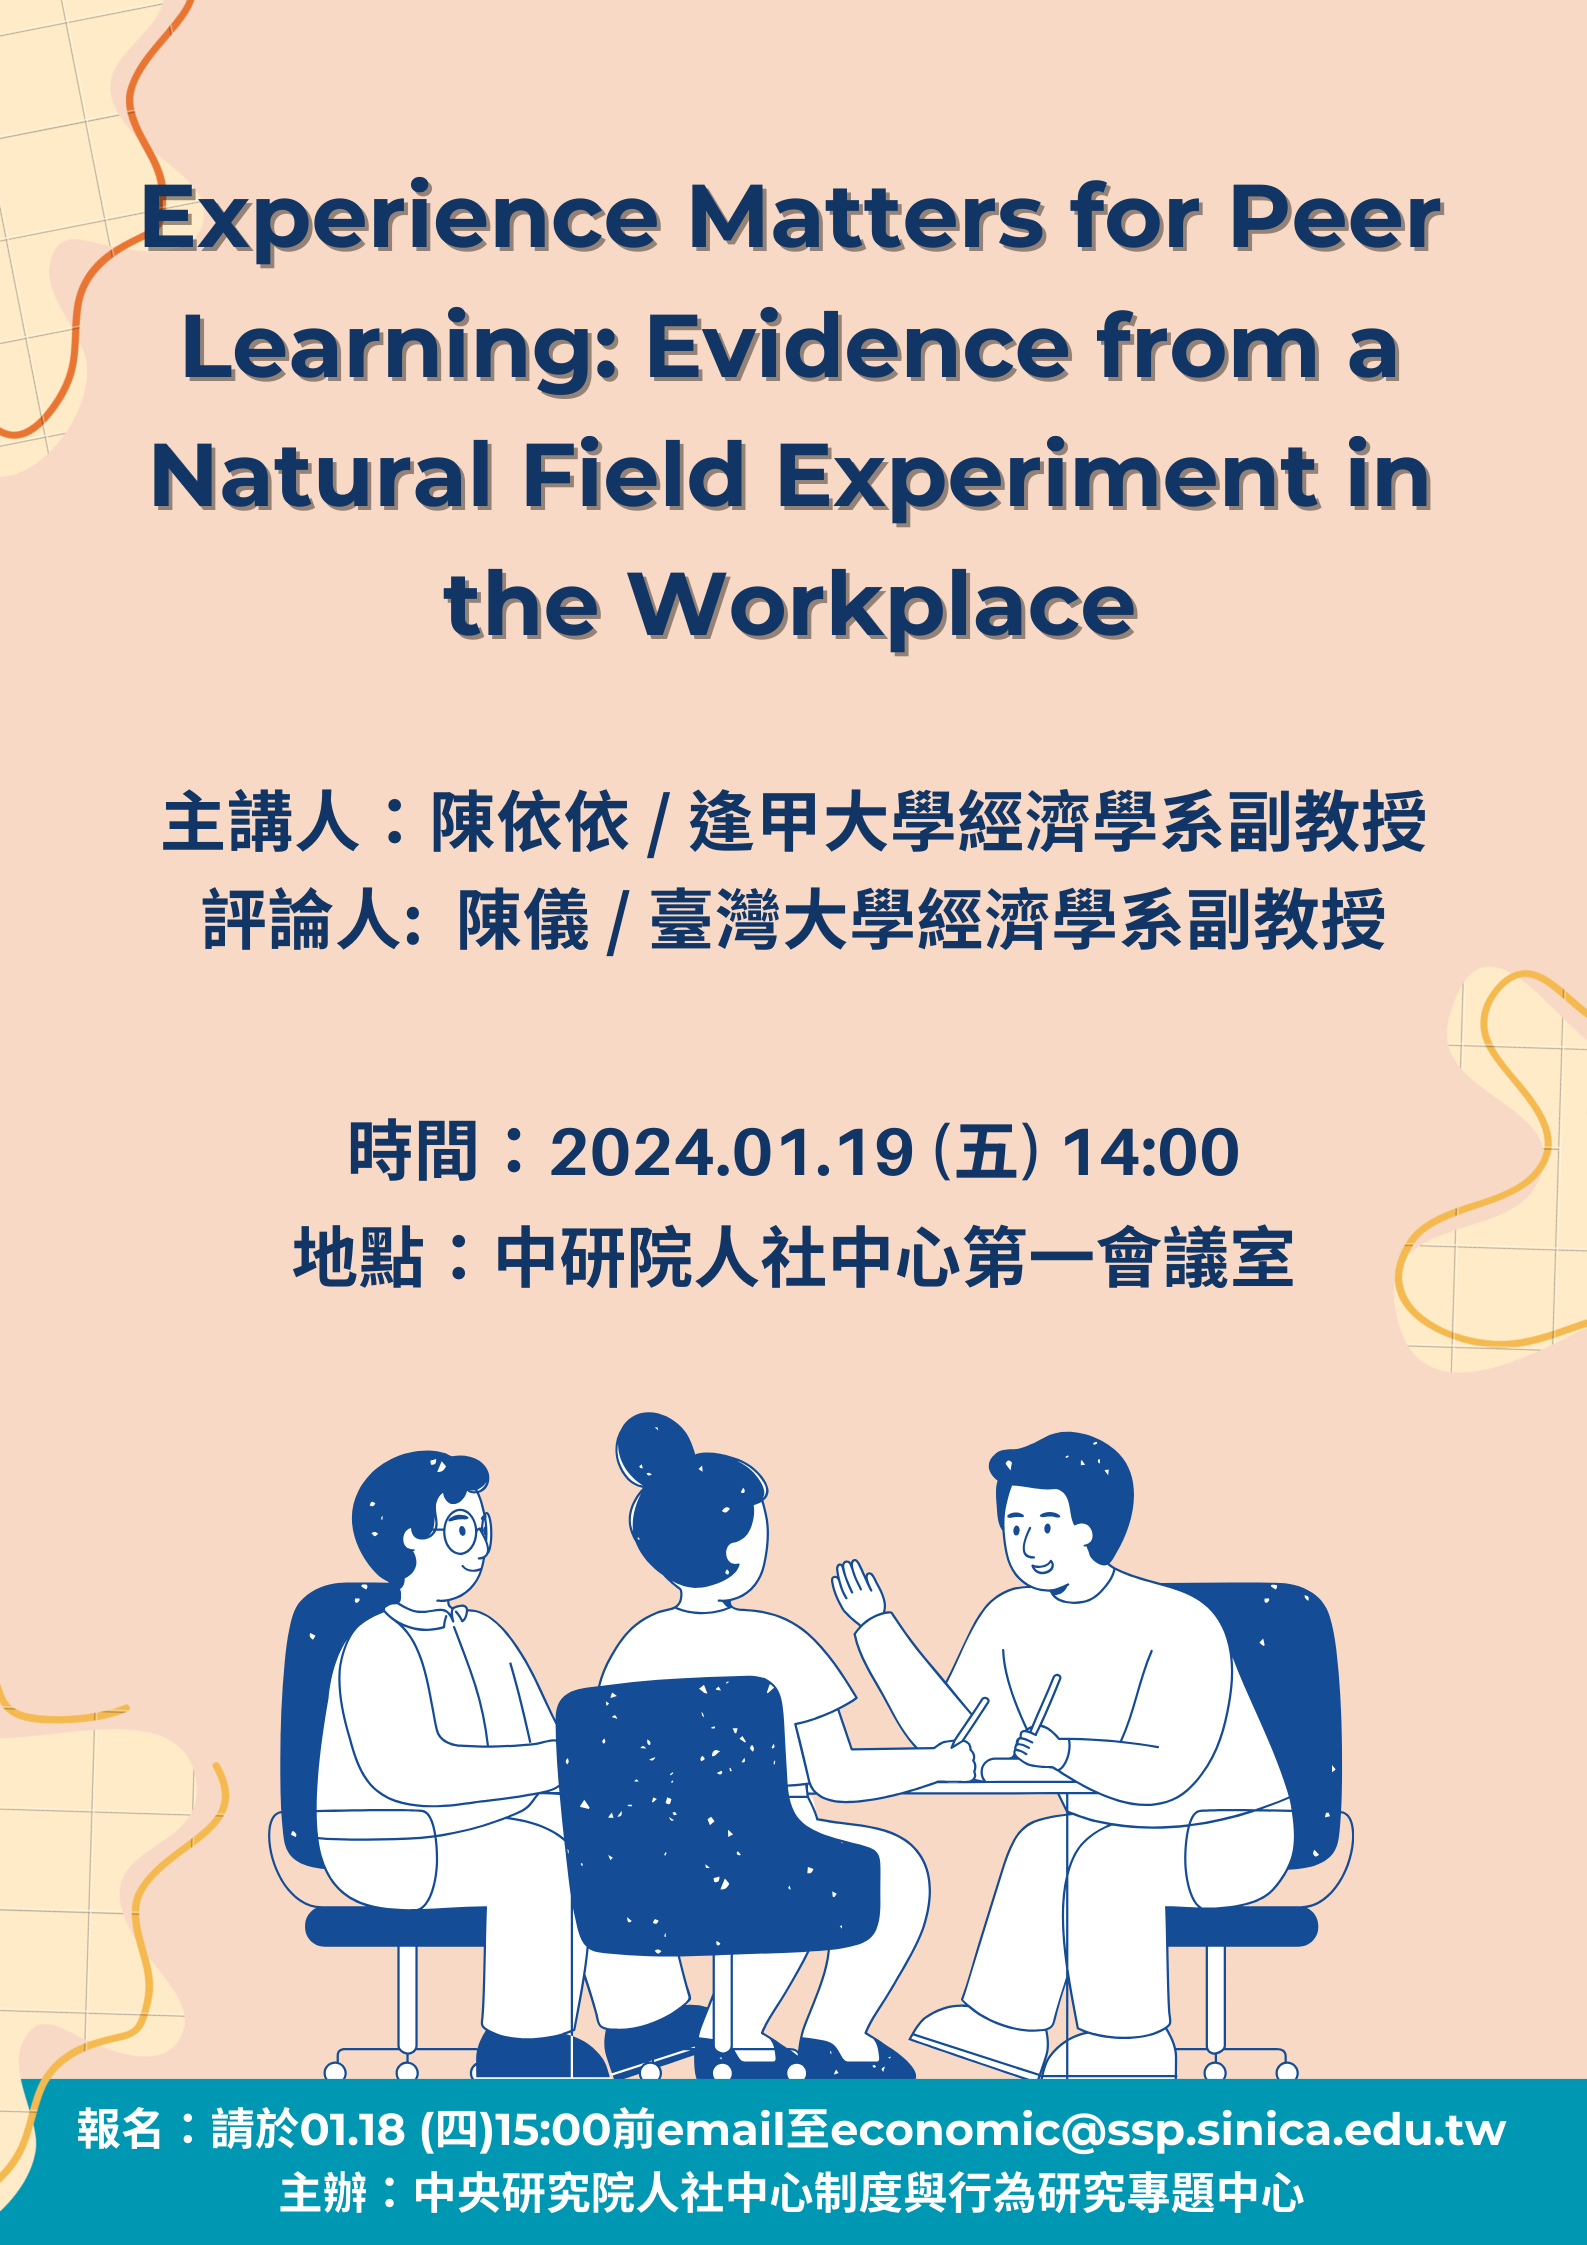 Experience_Matters_for_Peer_Learning_Evidence_from_a_Natural_Field_Experiment_in_the_Workplace.png